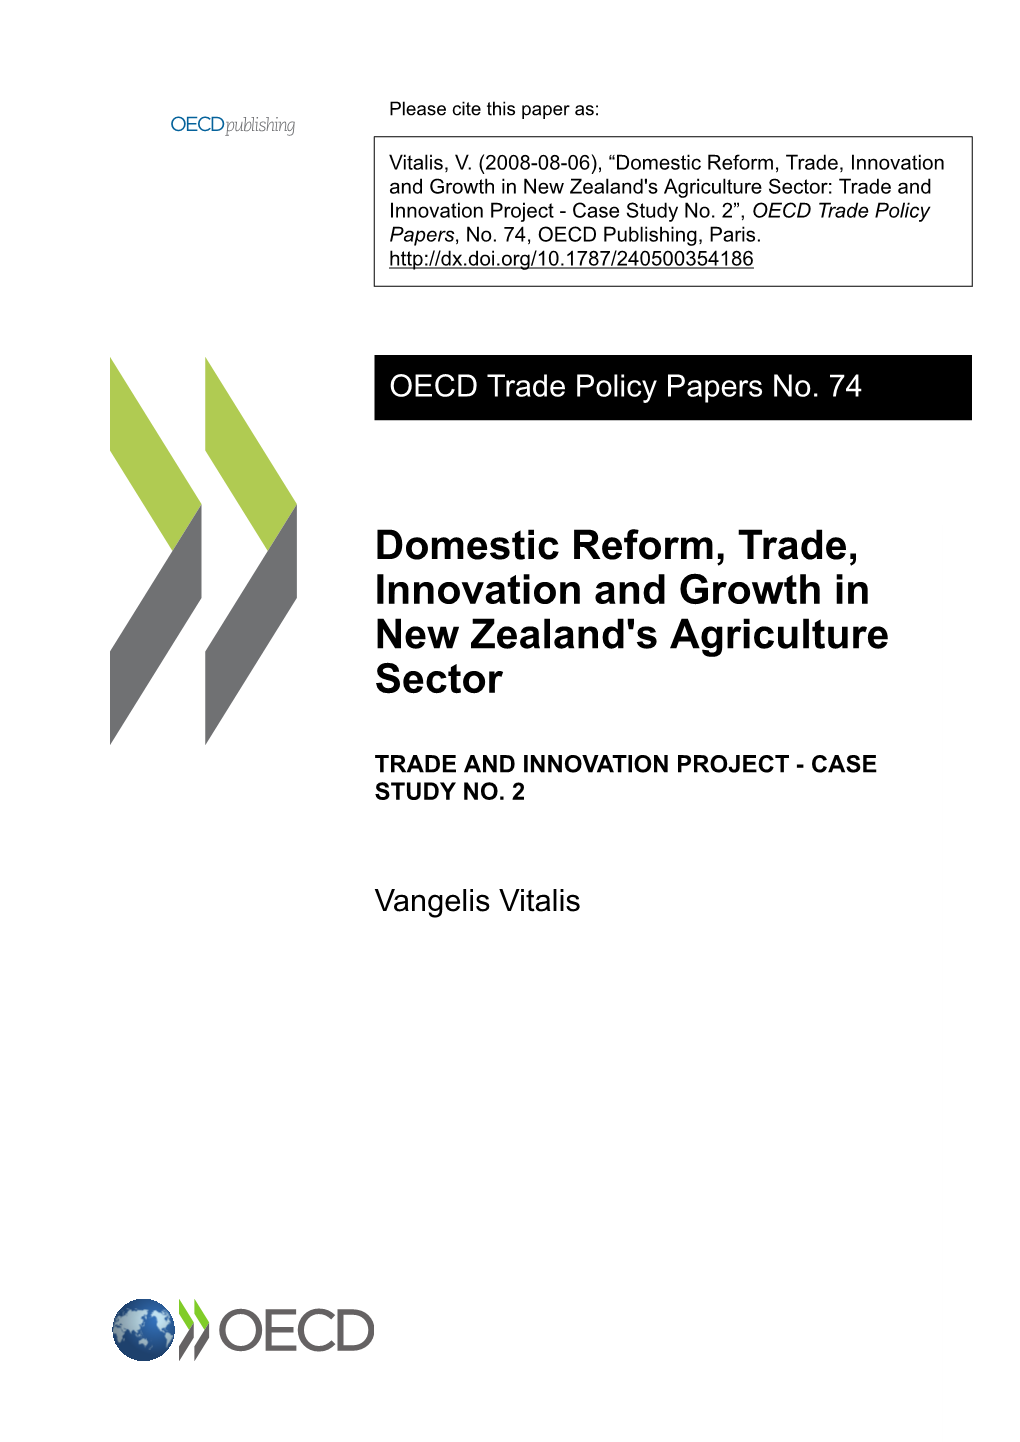 Domestic Reform, Trade, Innovation and Growth in New Zealand's Agriculture Sector: Trade and Innovation Project - Case Study No